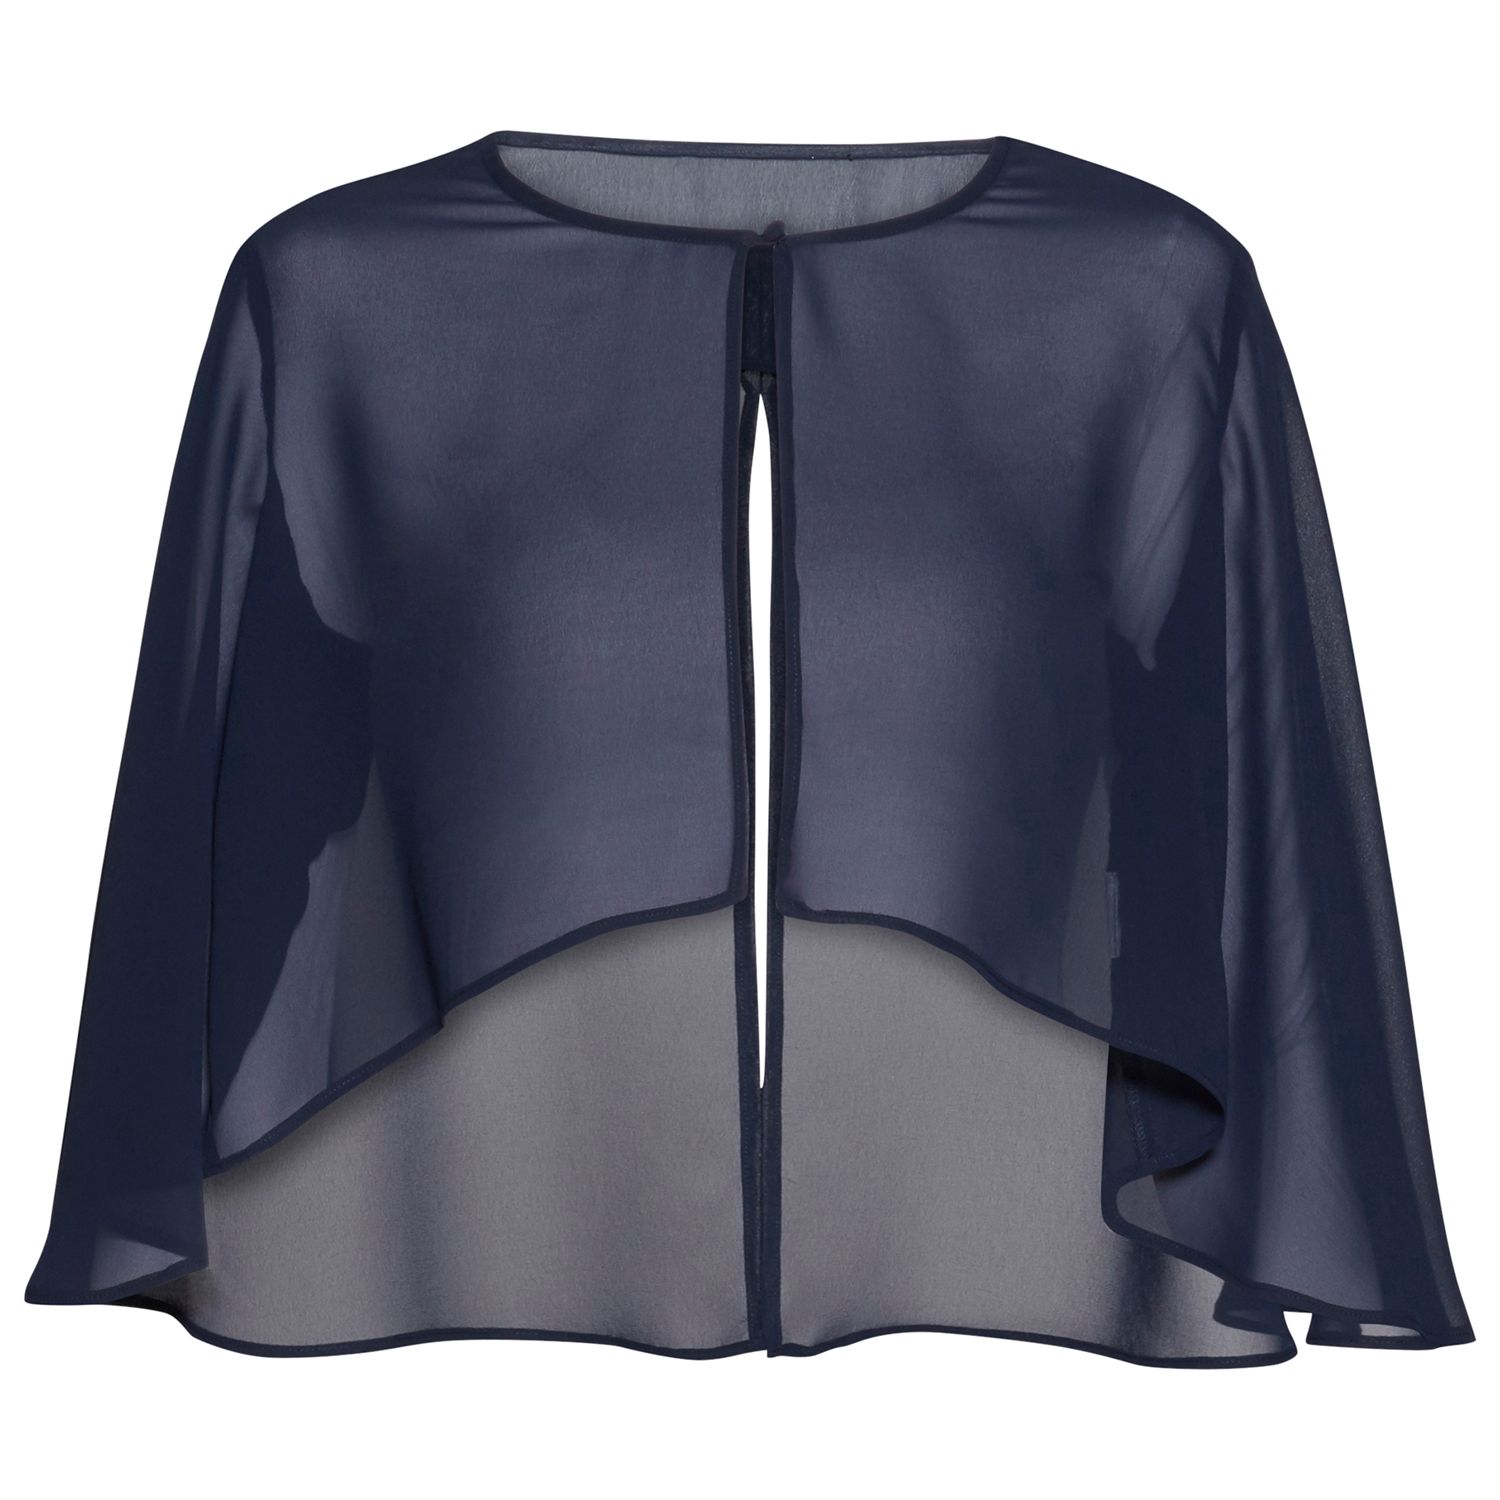 Gina Bacconi Chiffon Cape With Open Back Detail, Spring Navy, 16